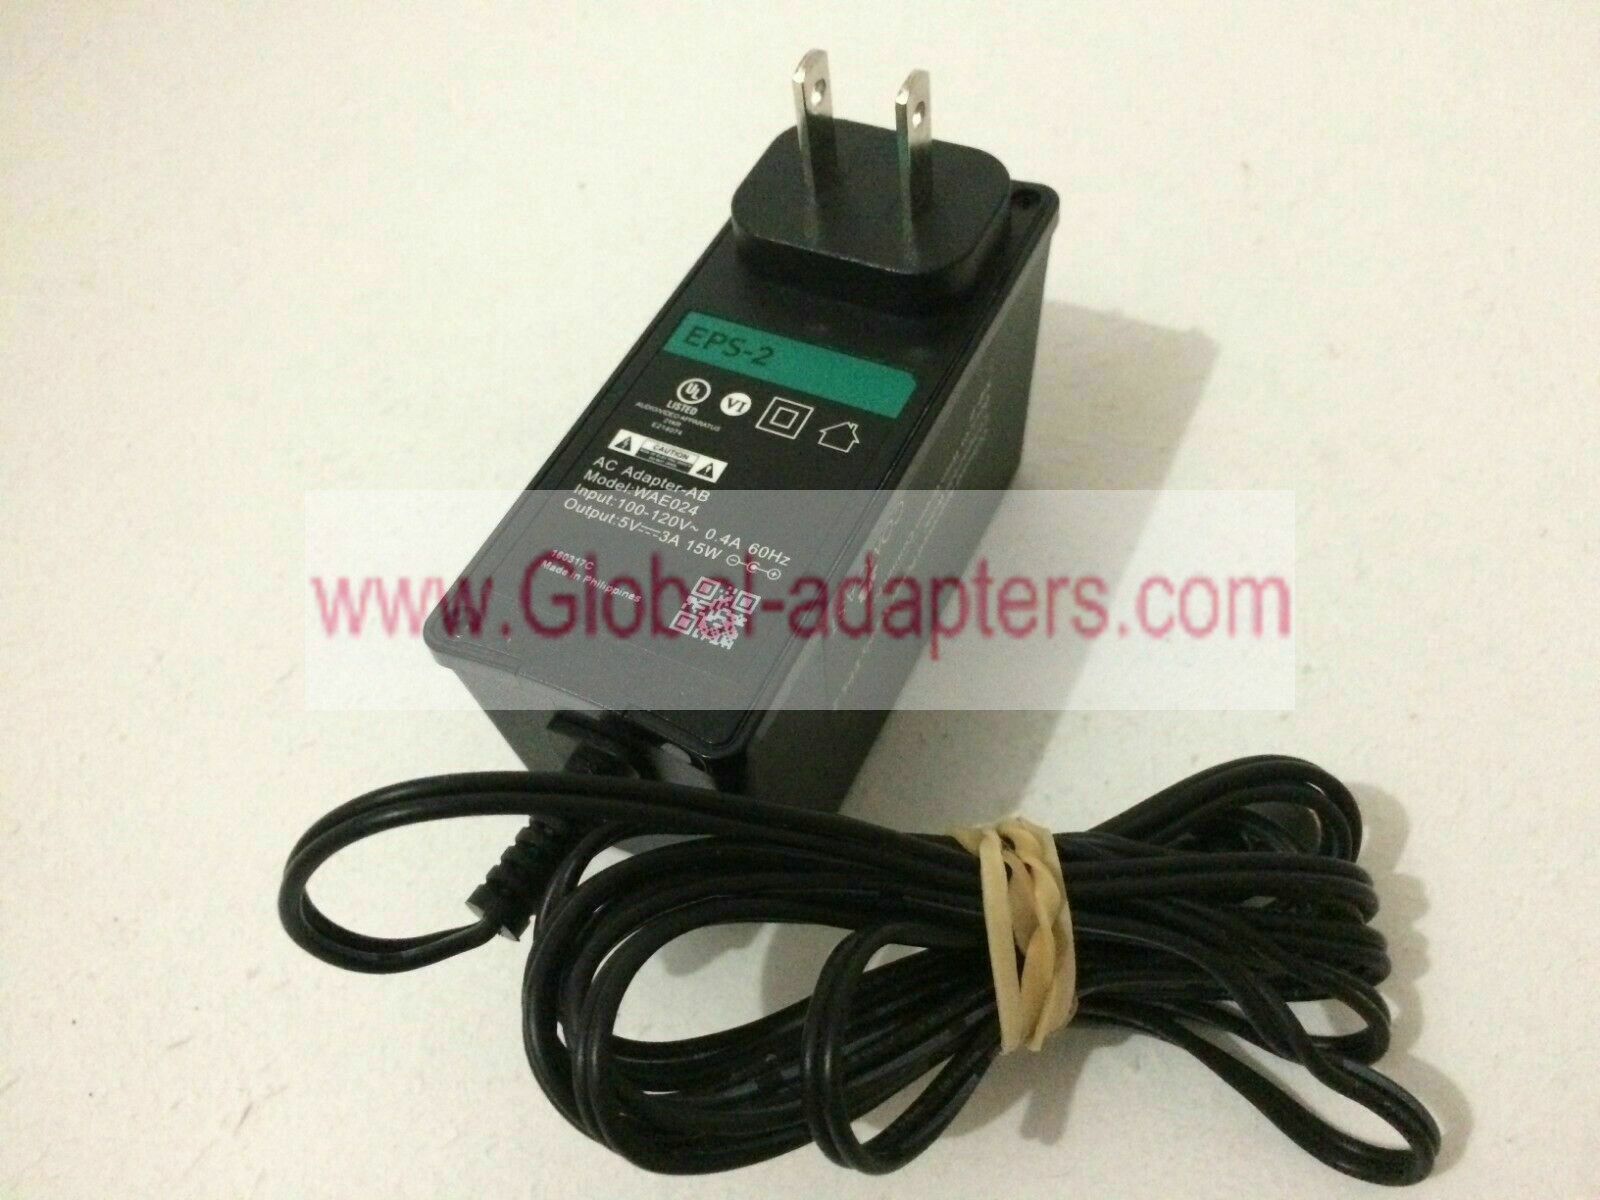 New EPS-2 WAE024 5V 3A 15W AC Adapter Switching Power Supply XiD-P Comcast - Click Image to Close